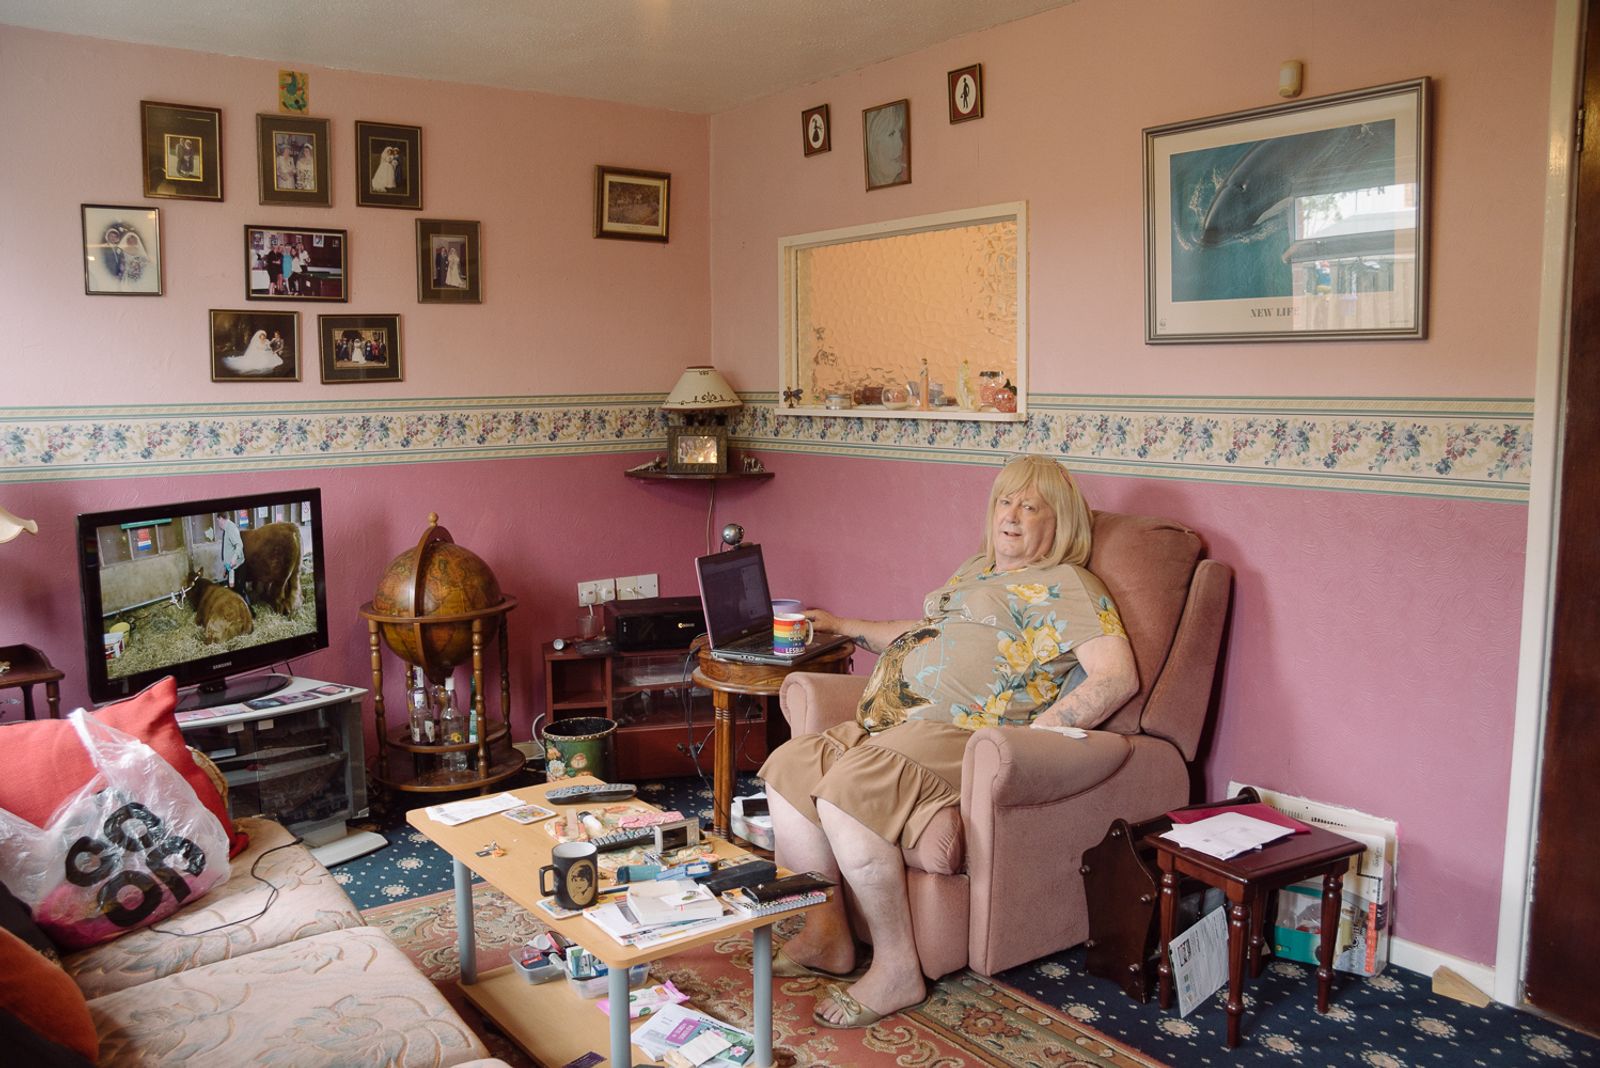 © Emma Wilson - Janet in the family home in Hull where Jim and his wife raised 3 children.